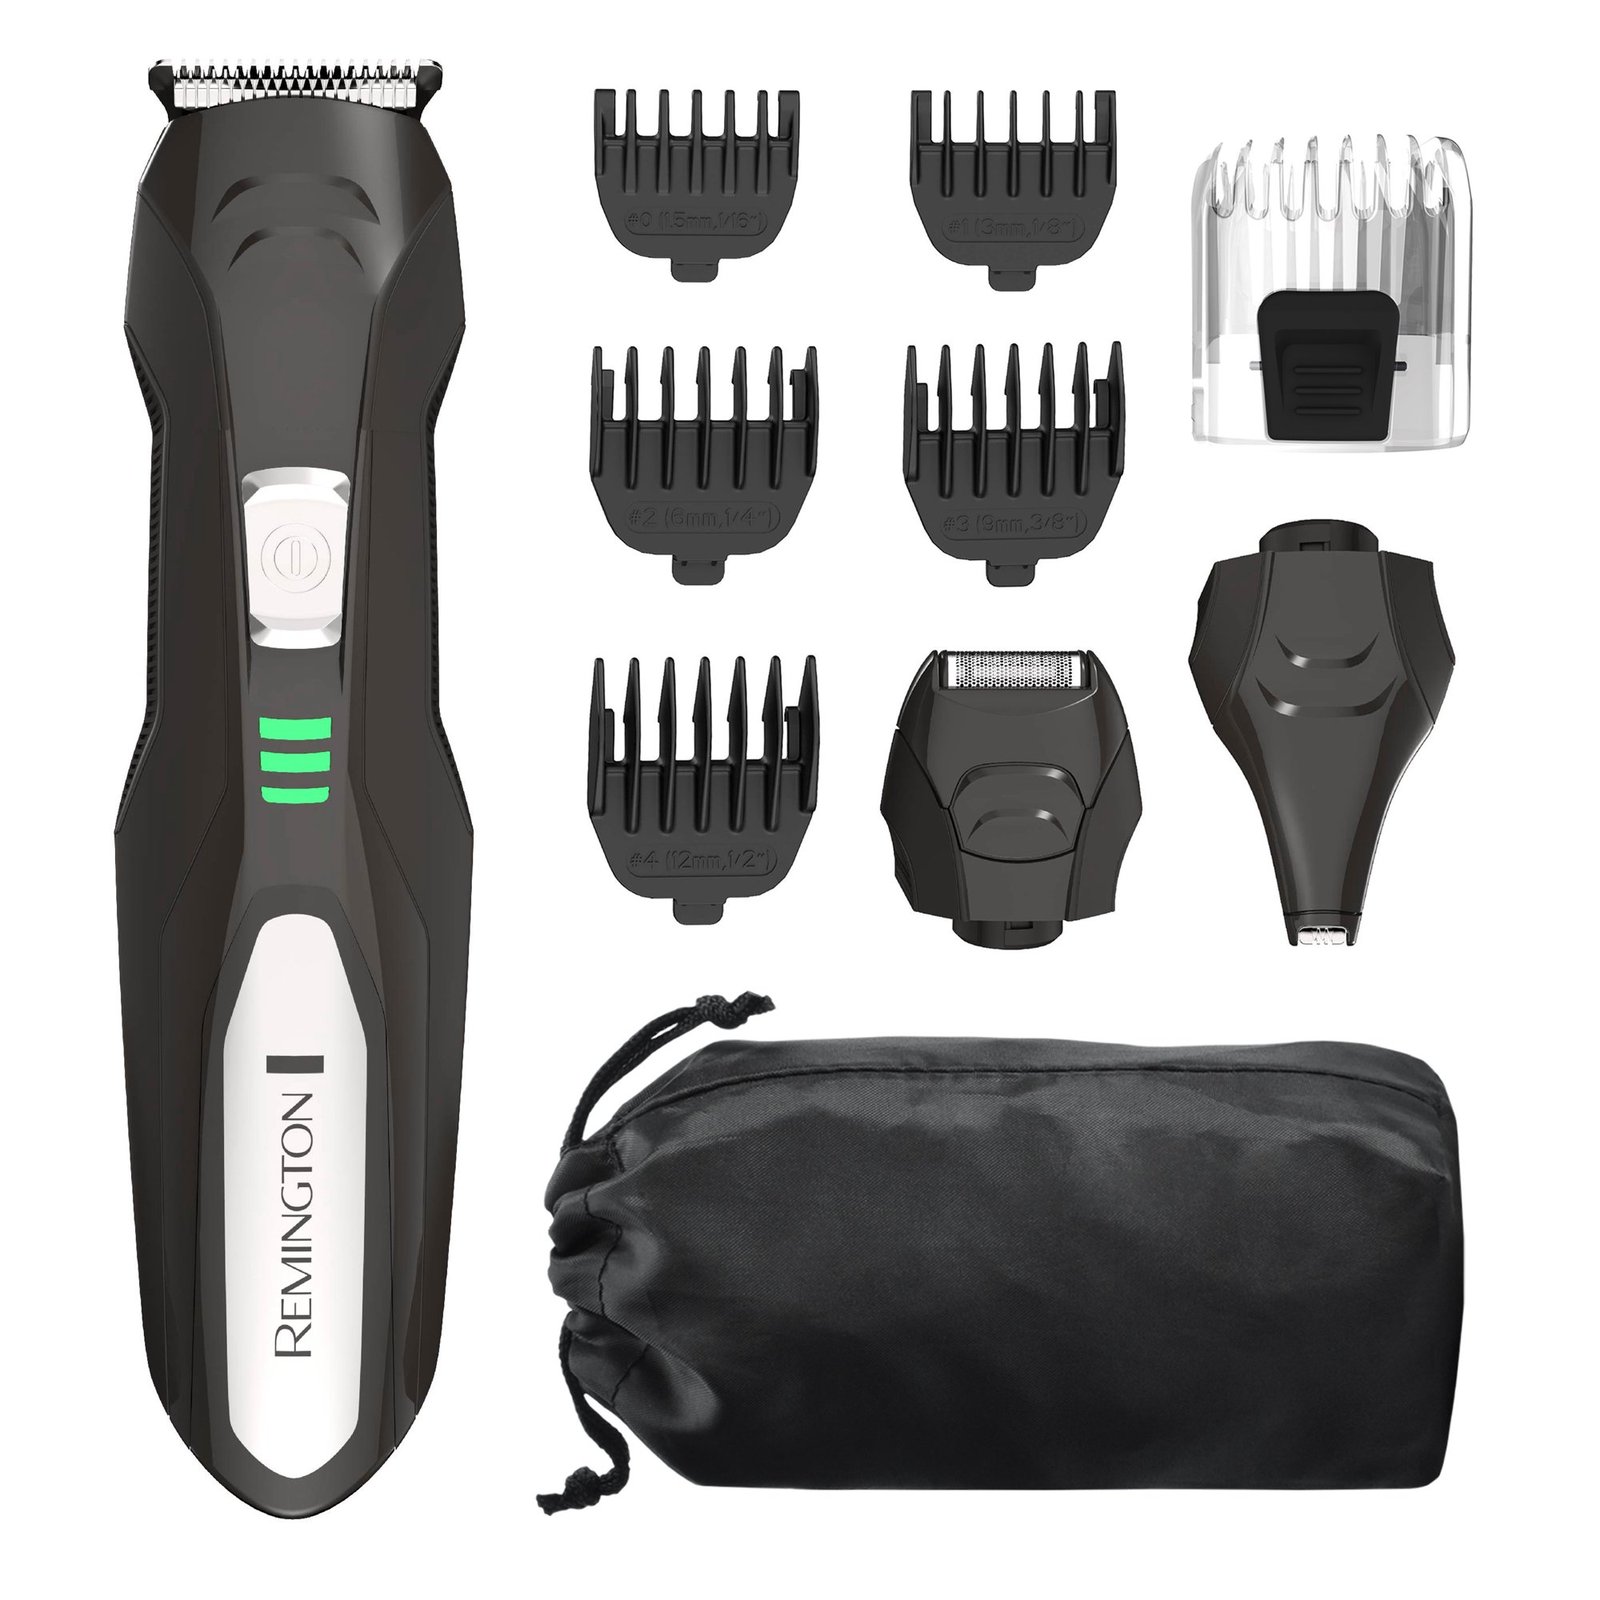 Remington All-In-One Grooming Kit Beard Trimmer Hair Clippers Set - PG6024A